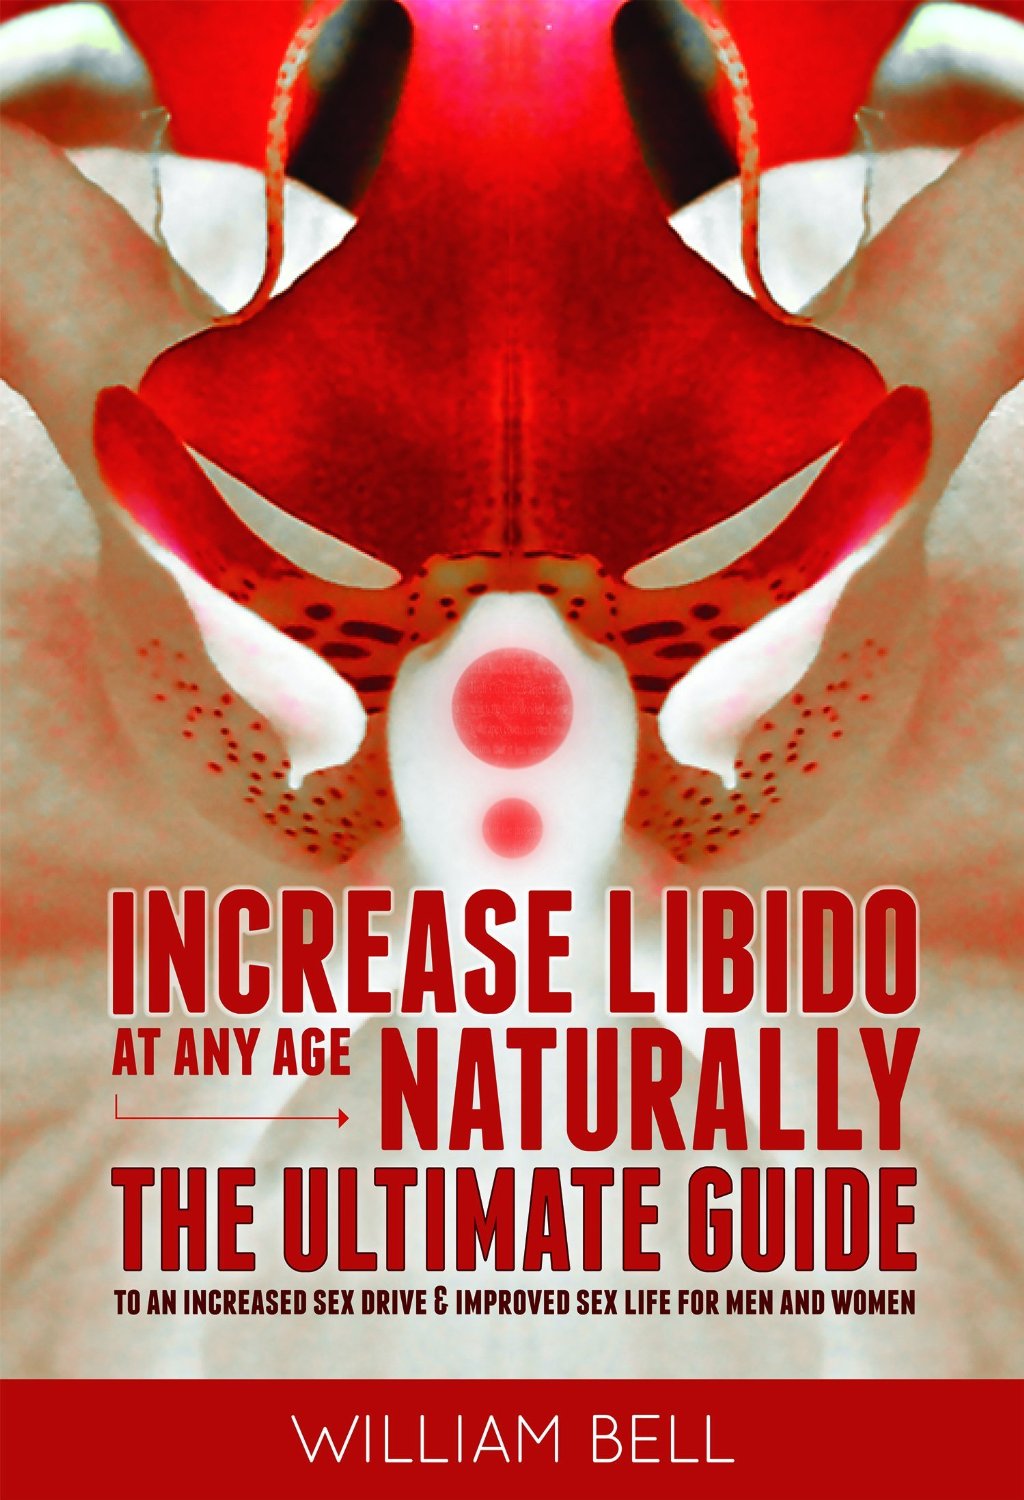 Increase Libido at Any Age Naturally: The Ultimate Guide to Increased Sex Drive & Improved Sex Life for Men & Women by William Bell